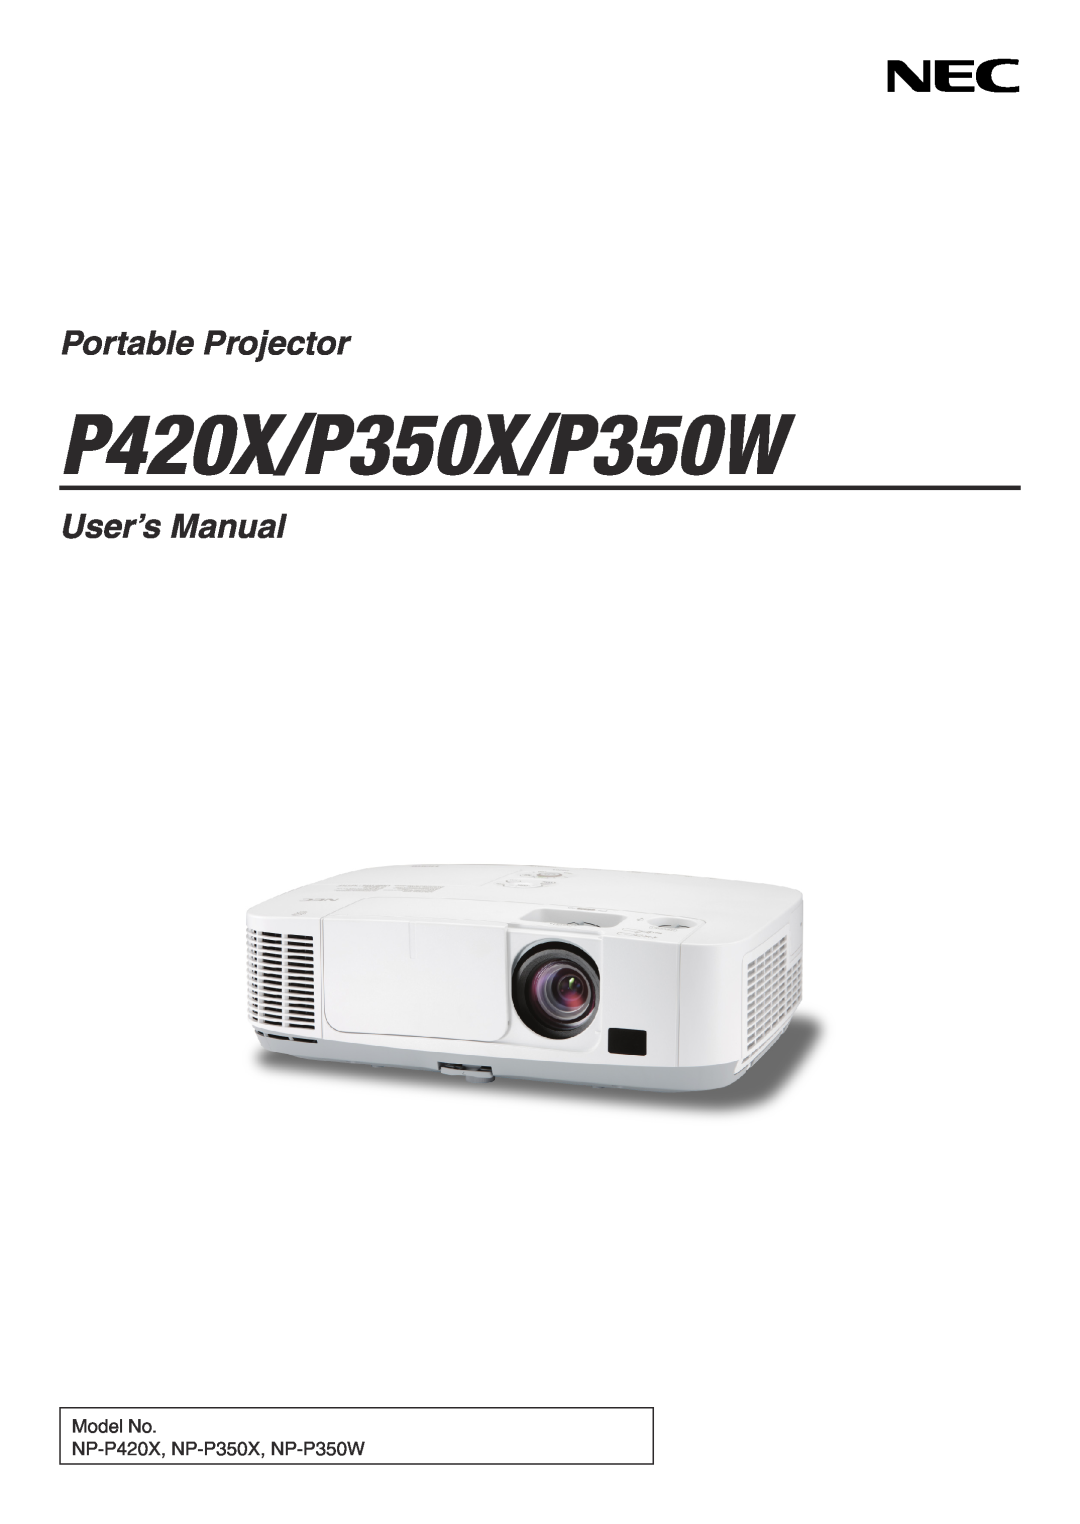 NEC NP-P350X, NP-P420X, NP-P350W user manual P420X/P350X/P350W, Portable Projector, User’s Manual 